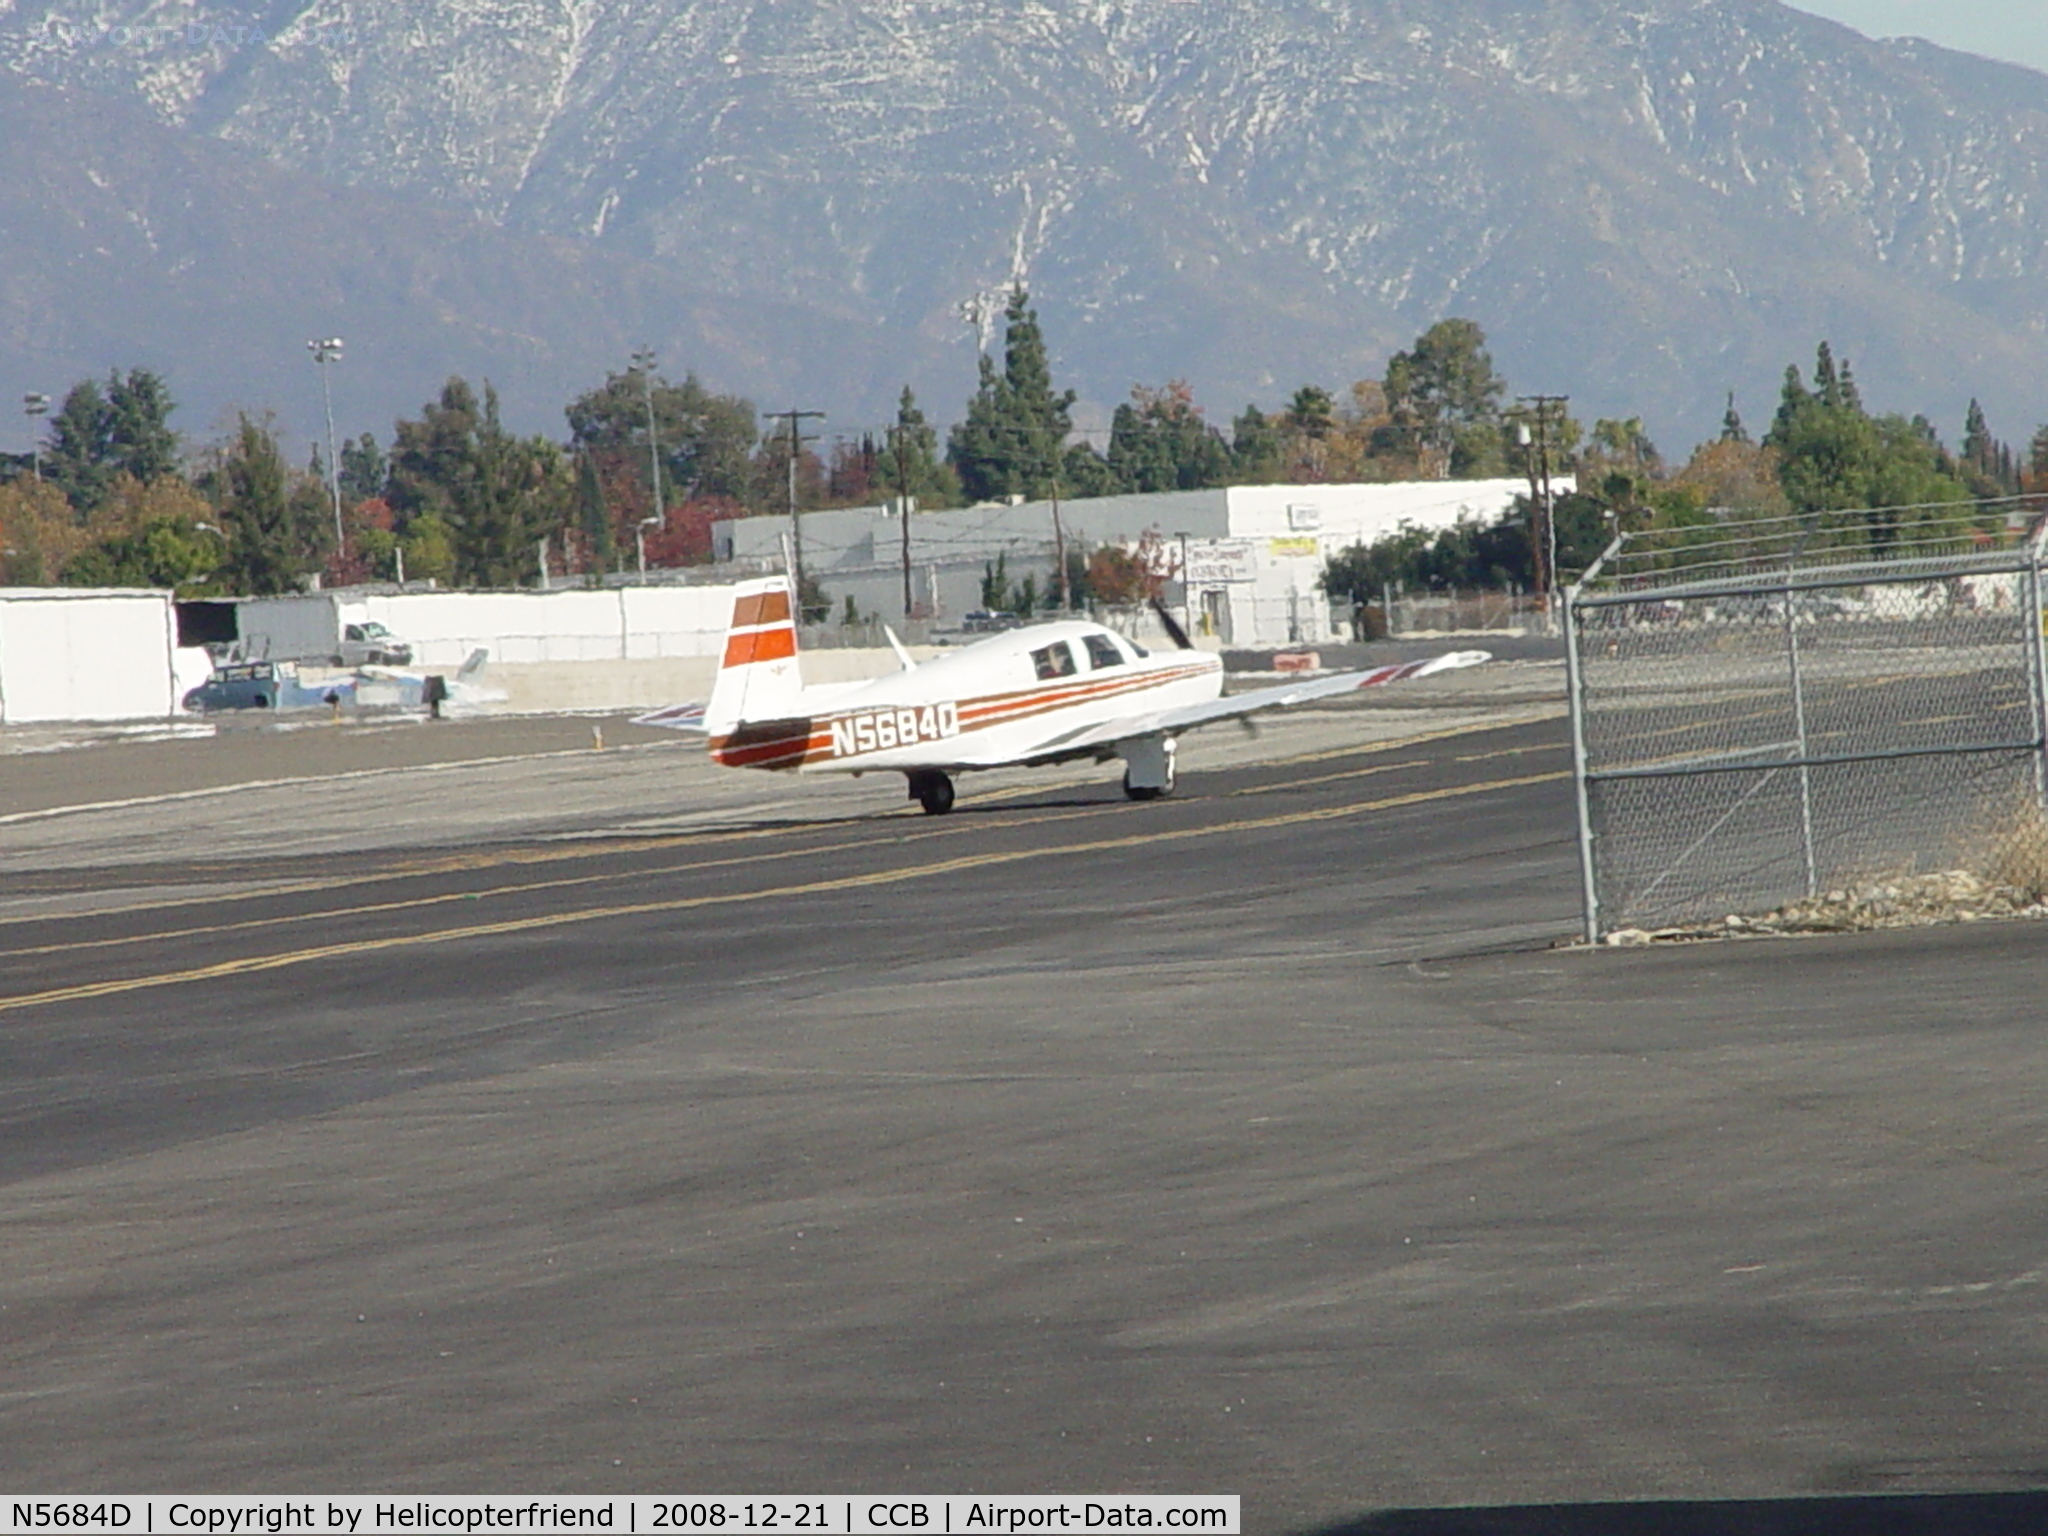 N5684D, Mooney M20J 201 C/N 24-3064, Taxiing back towards Cable tower